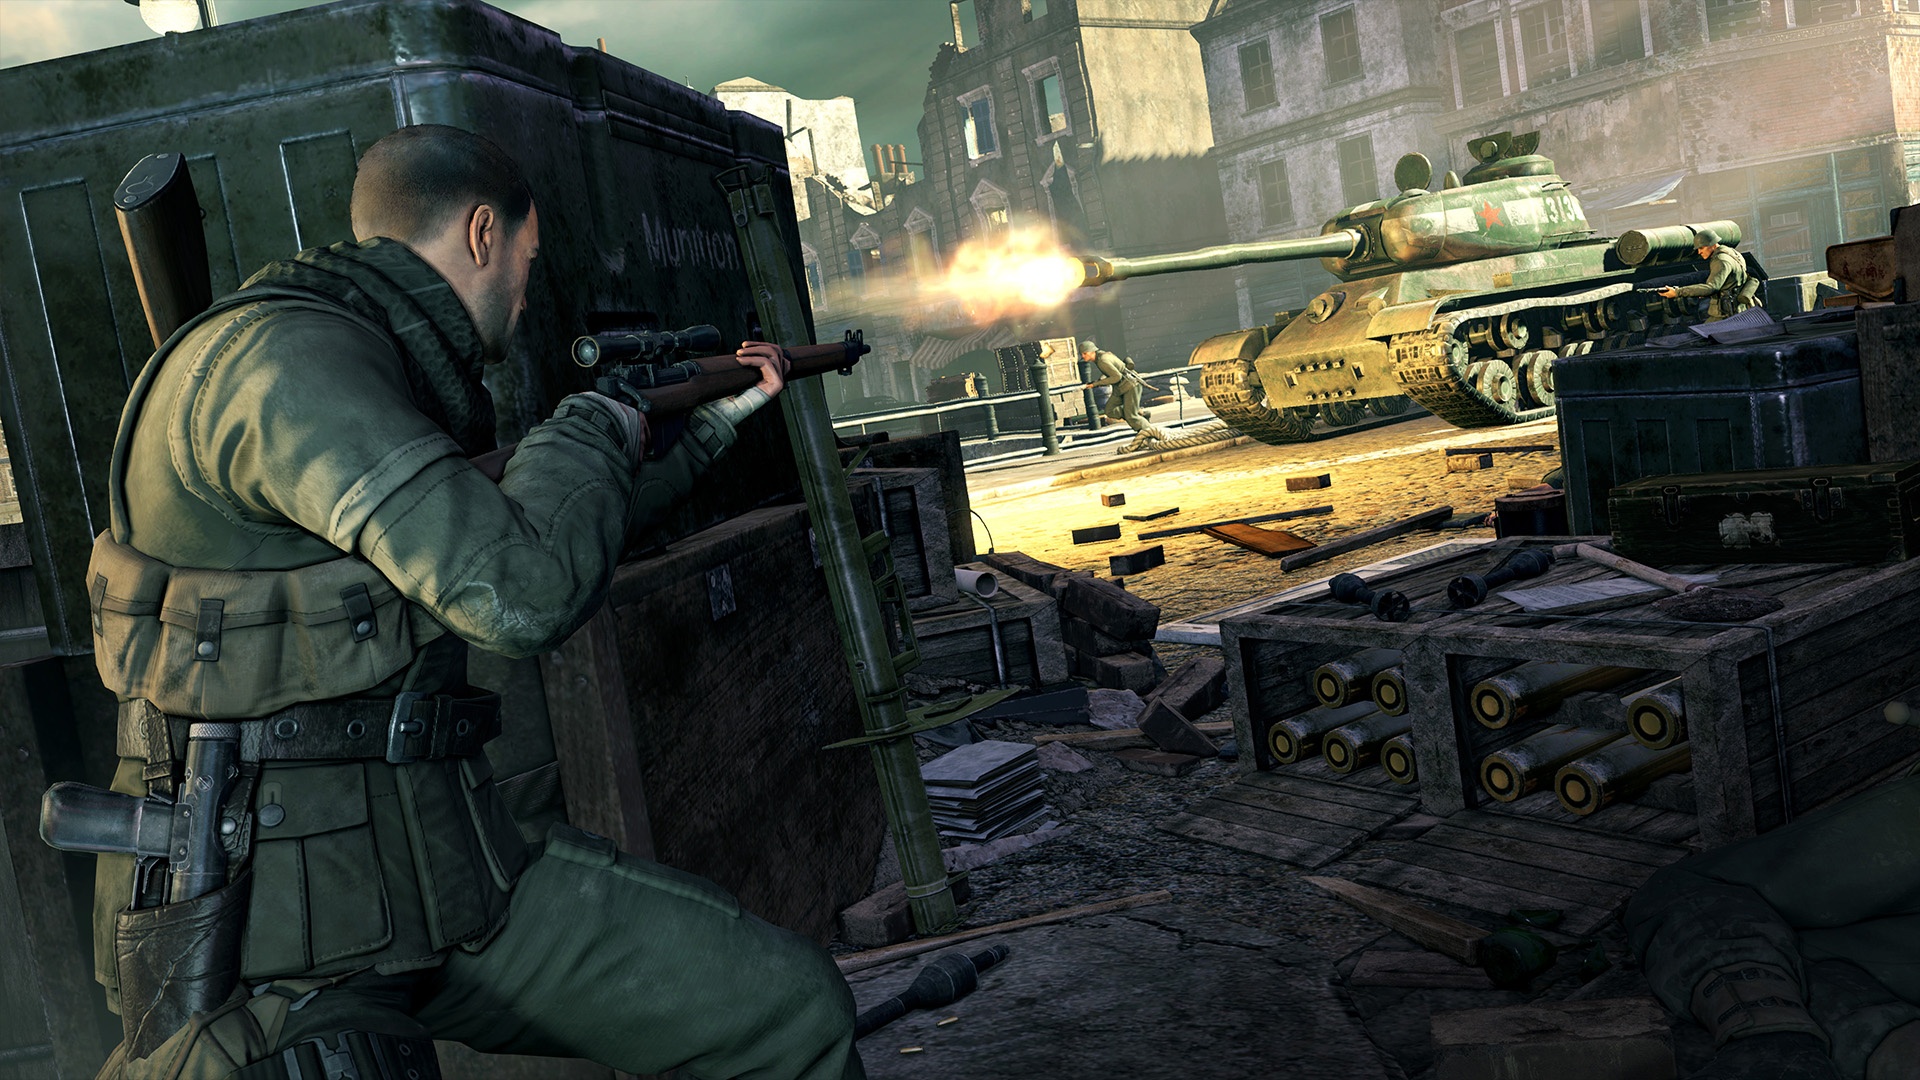 Action, Gore, Nintendo Switch Review, Shooter, Sniper, Sniper Elite, Sniper Elite V2 Remastered, Sniper Elite V2 Remastered Review, Switch Review, Tactical, third-person, Violent, World War II